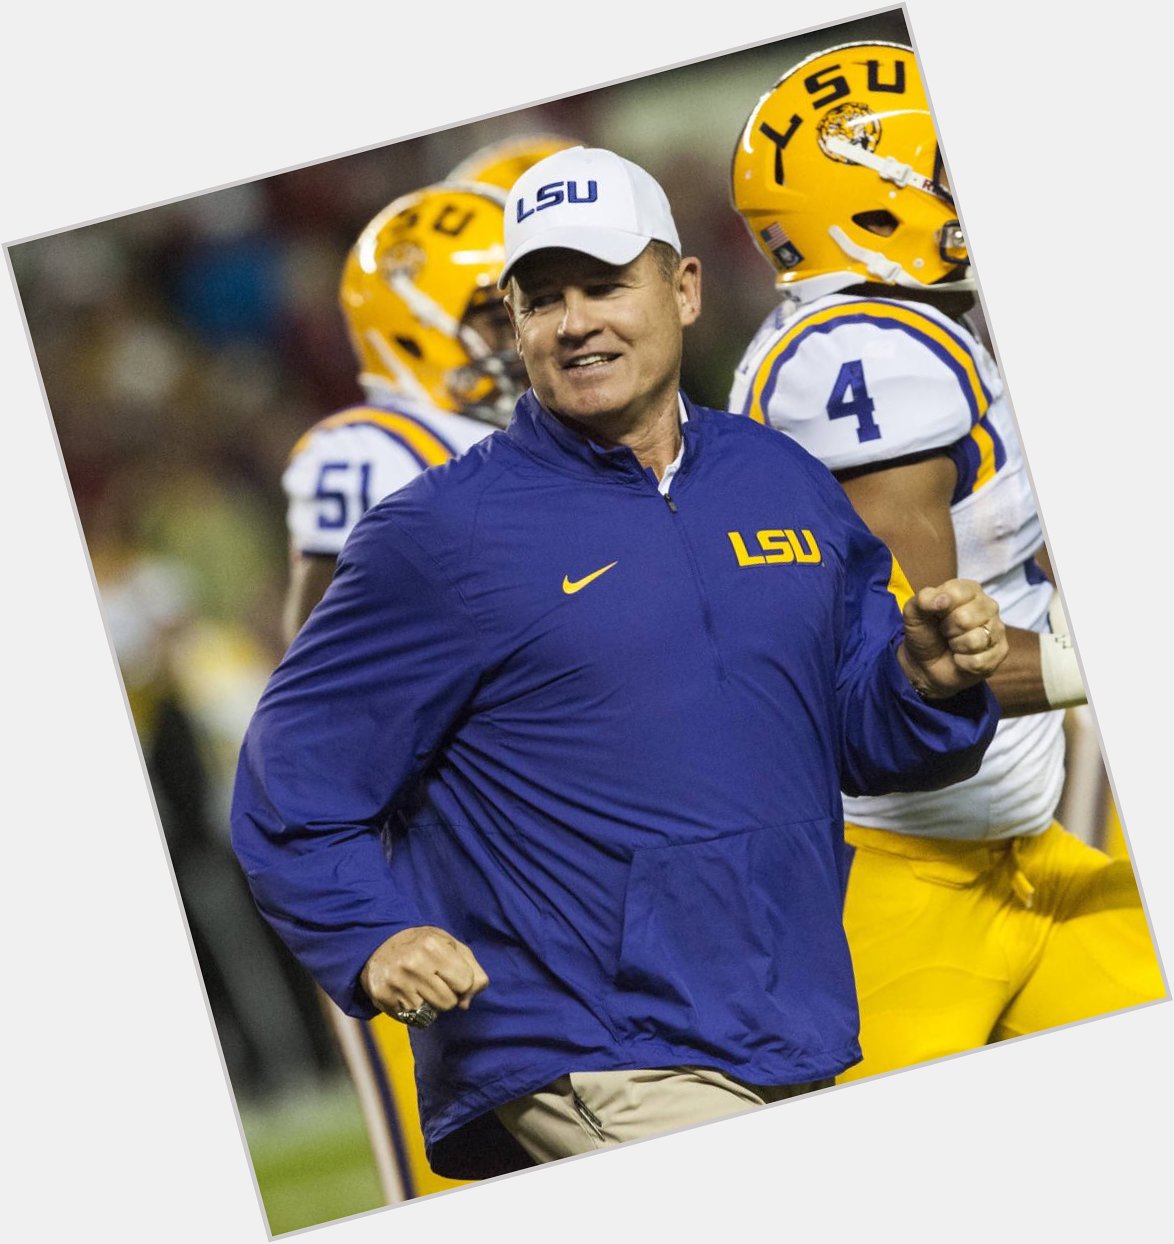 Also, Happy Birthday to Les Miles! Have a great day, coach!  